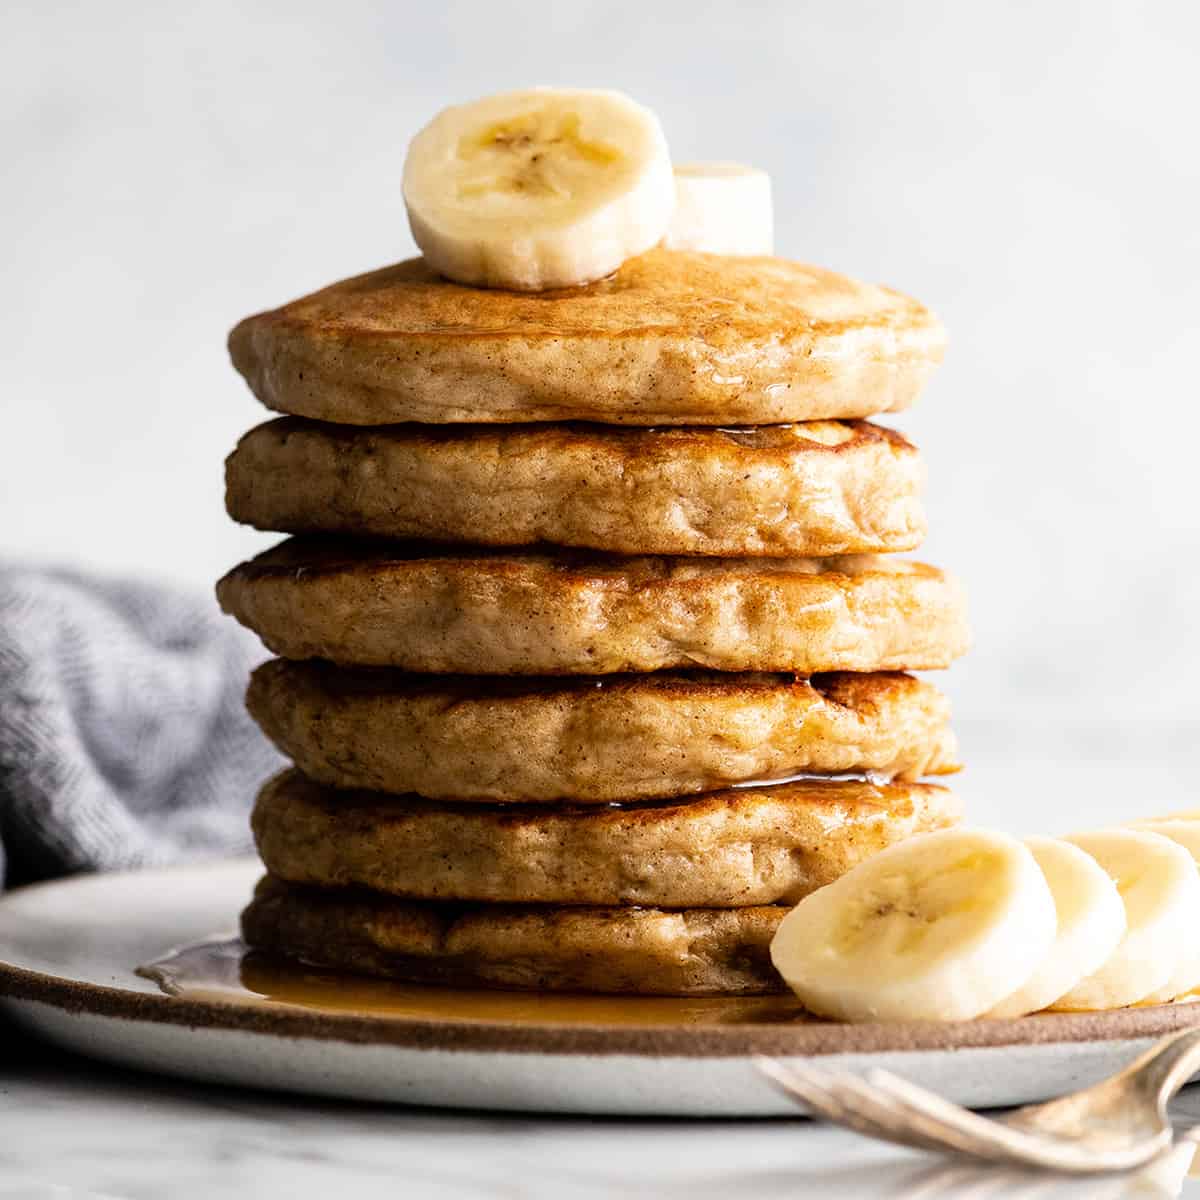 front view of a stack of 6 banana pancakes with syrup and sliced bananas